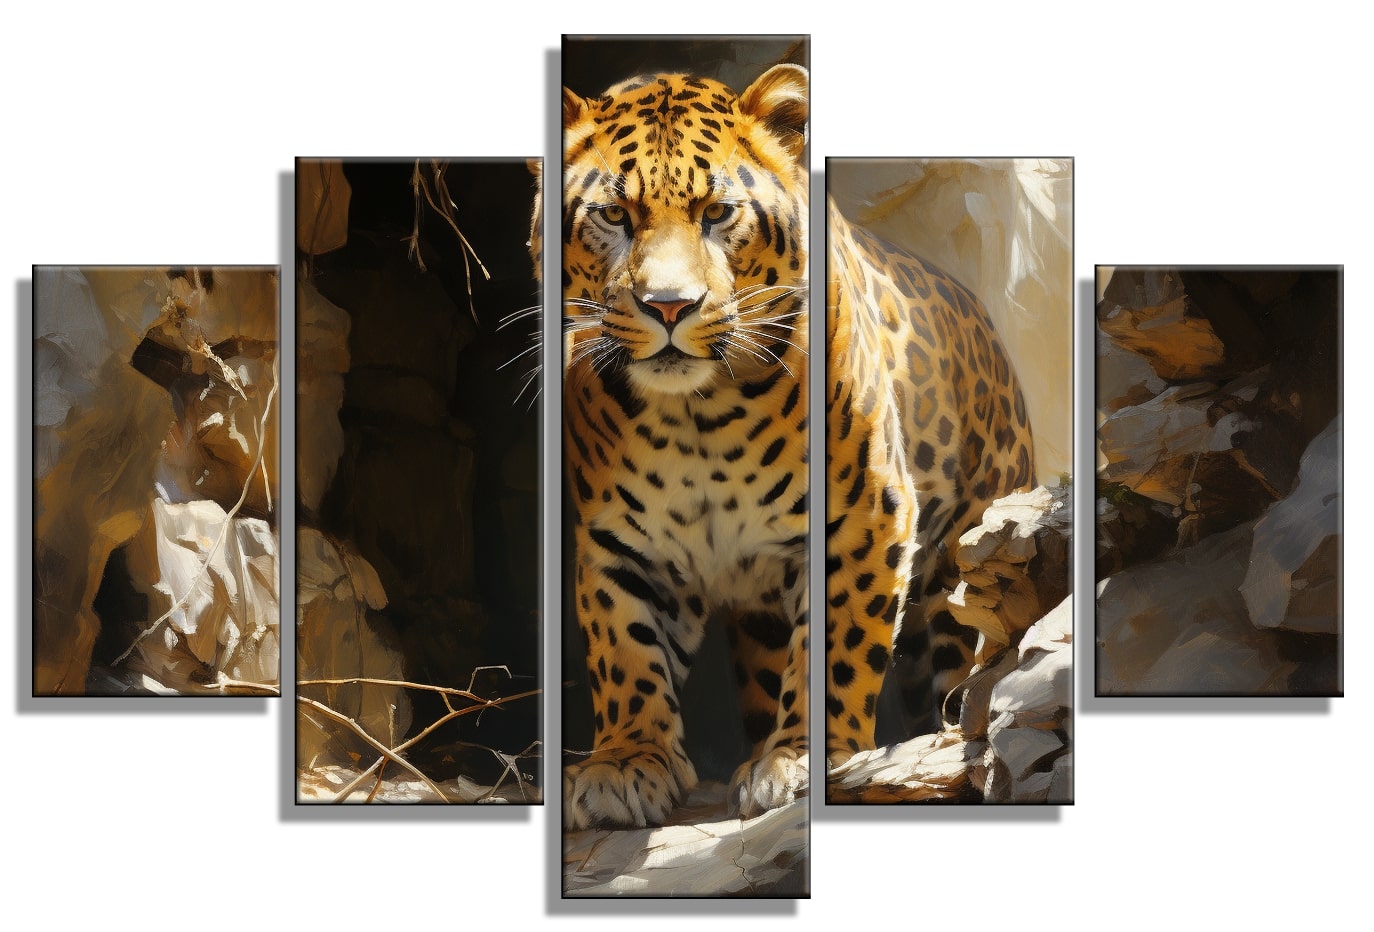 Leopard's Lair Realism Painting - 40x60 inches